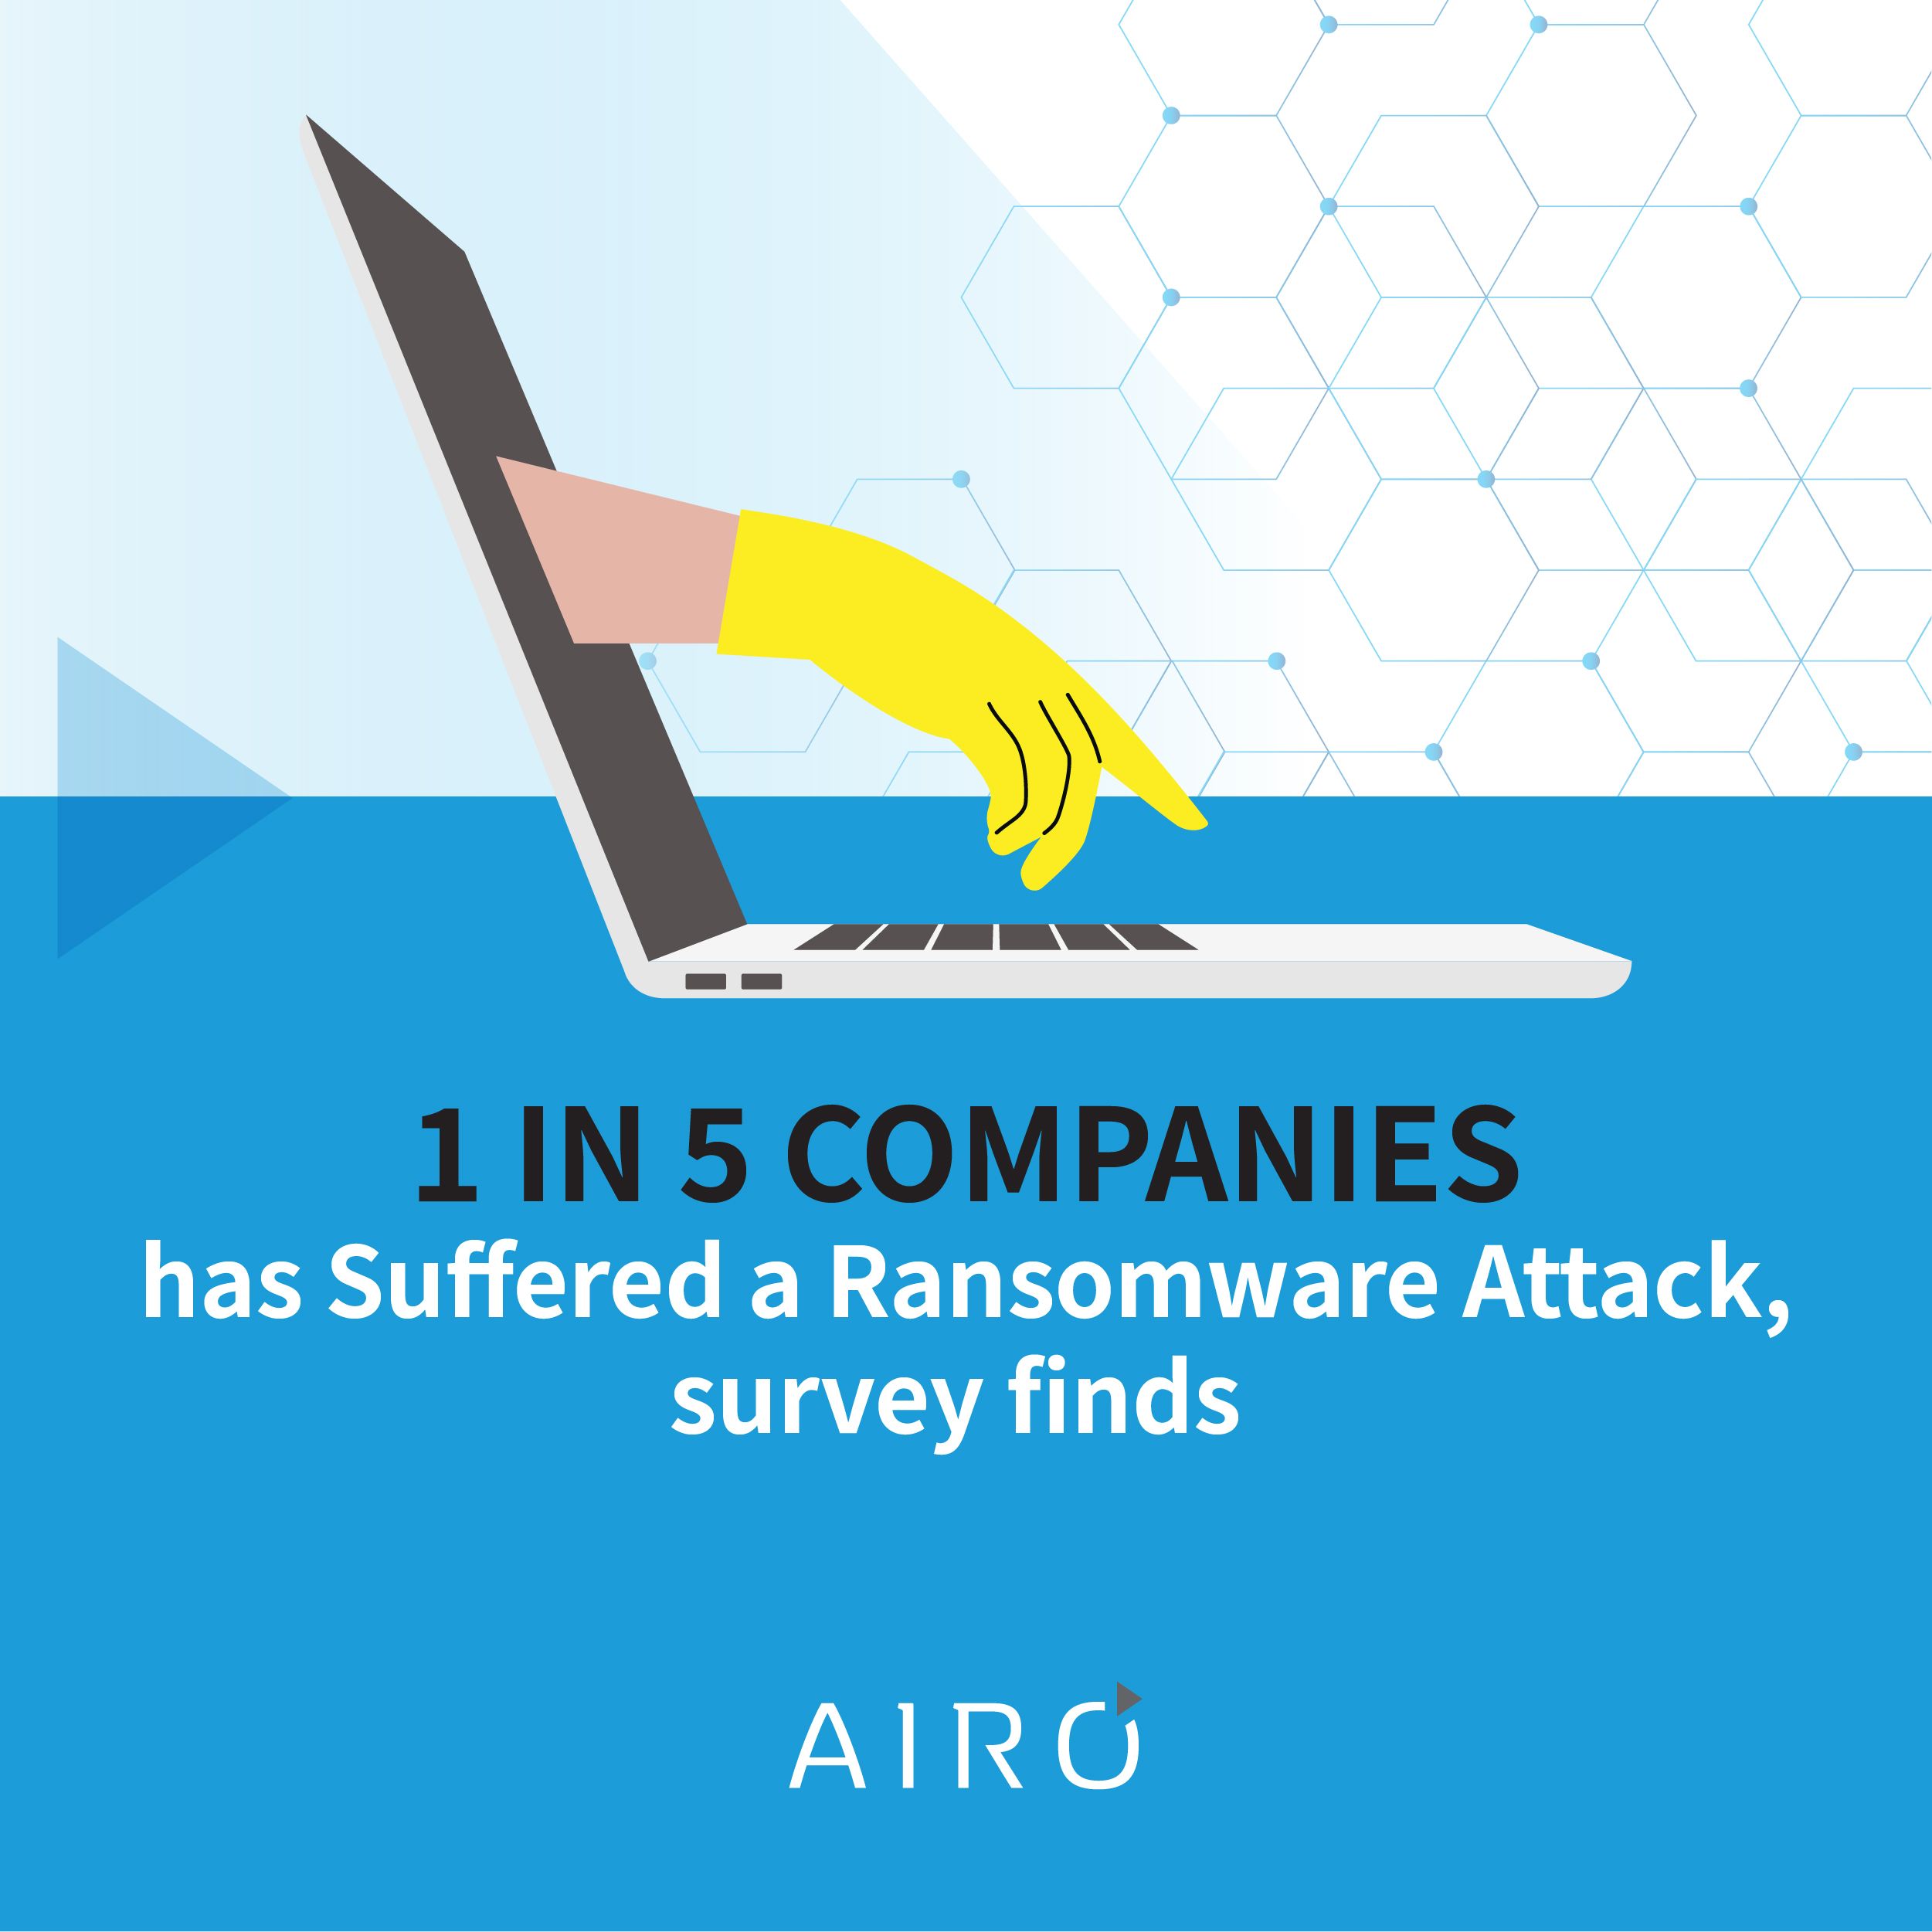 1 in 5 Companies has Suffered a Ransomware Attack, Survey Finds